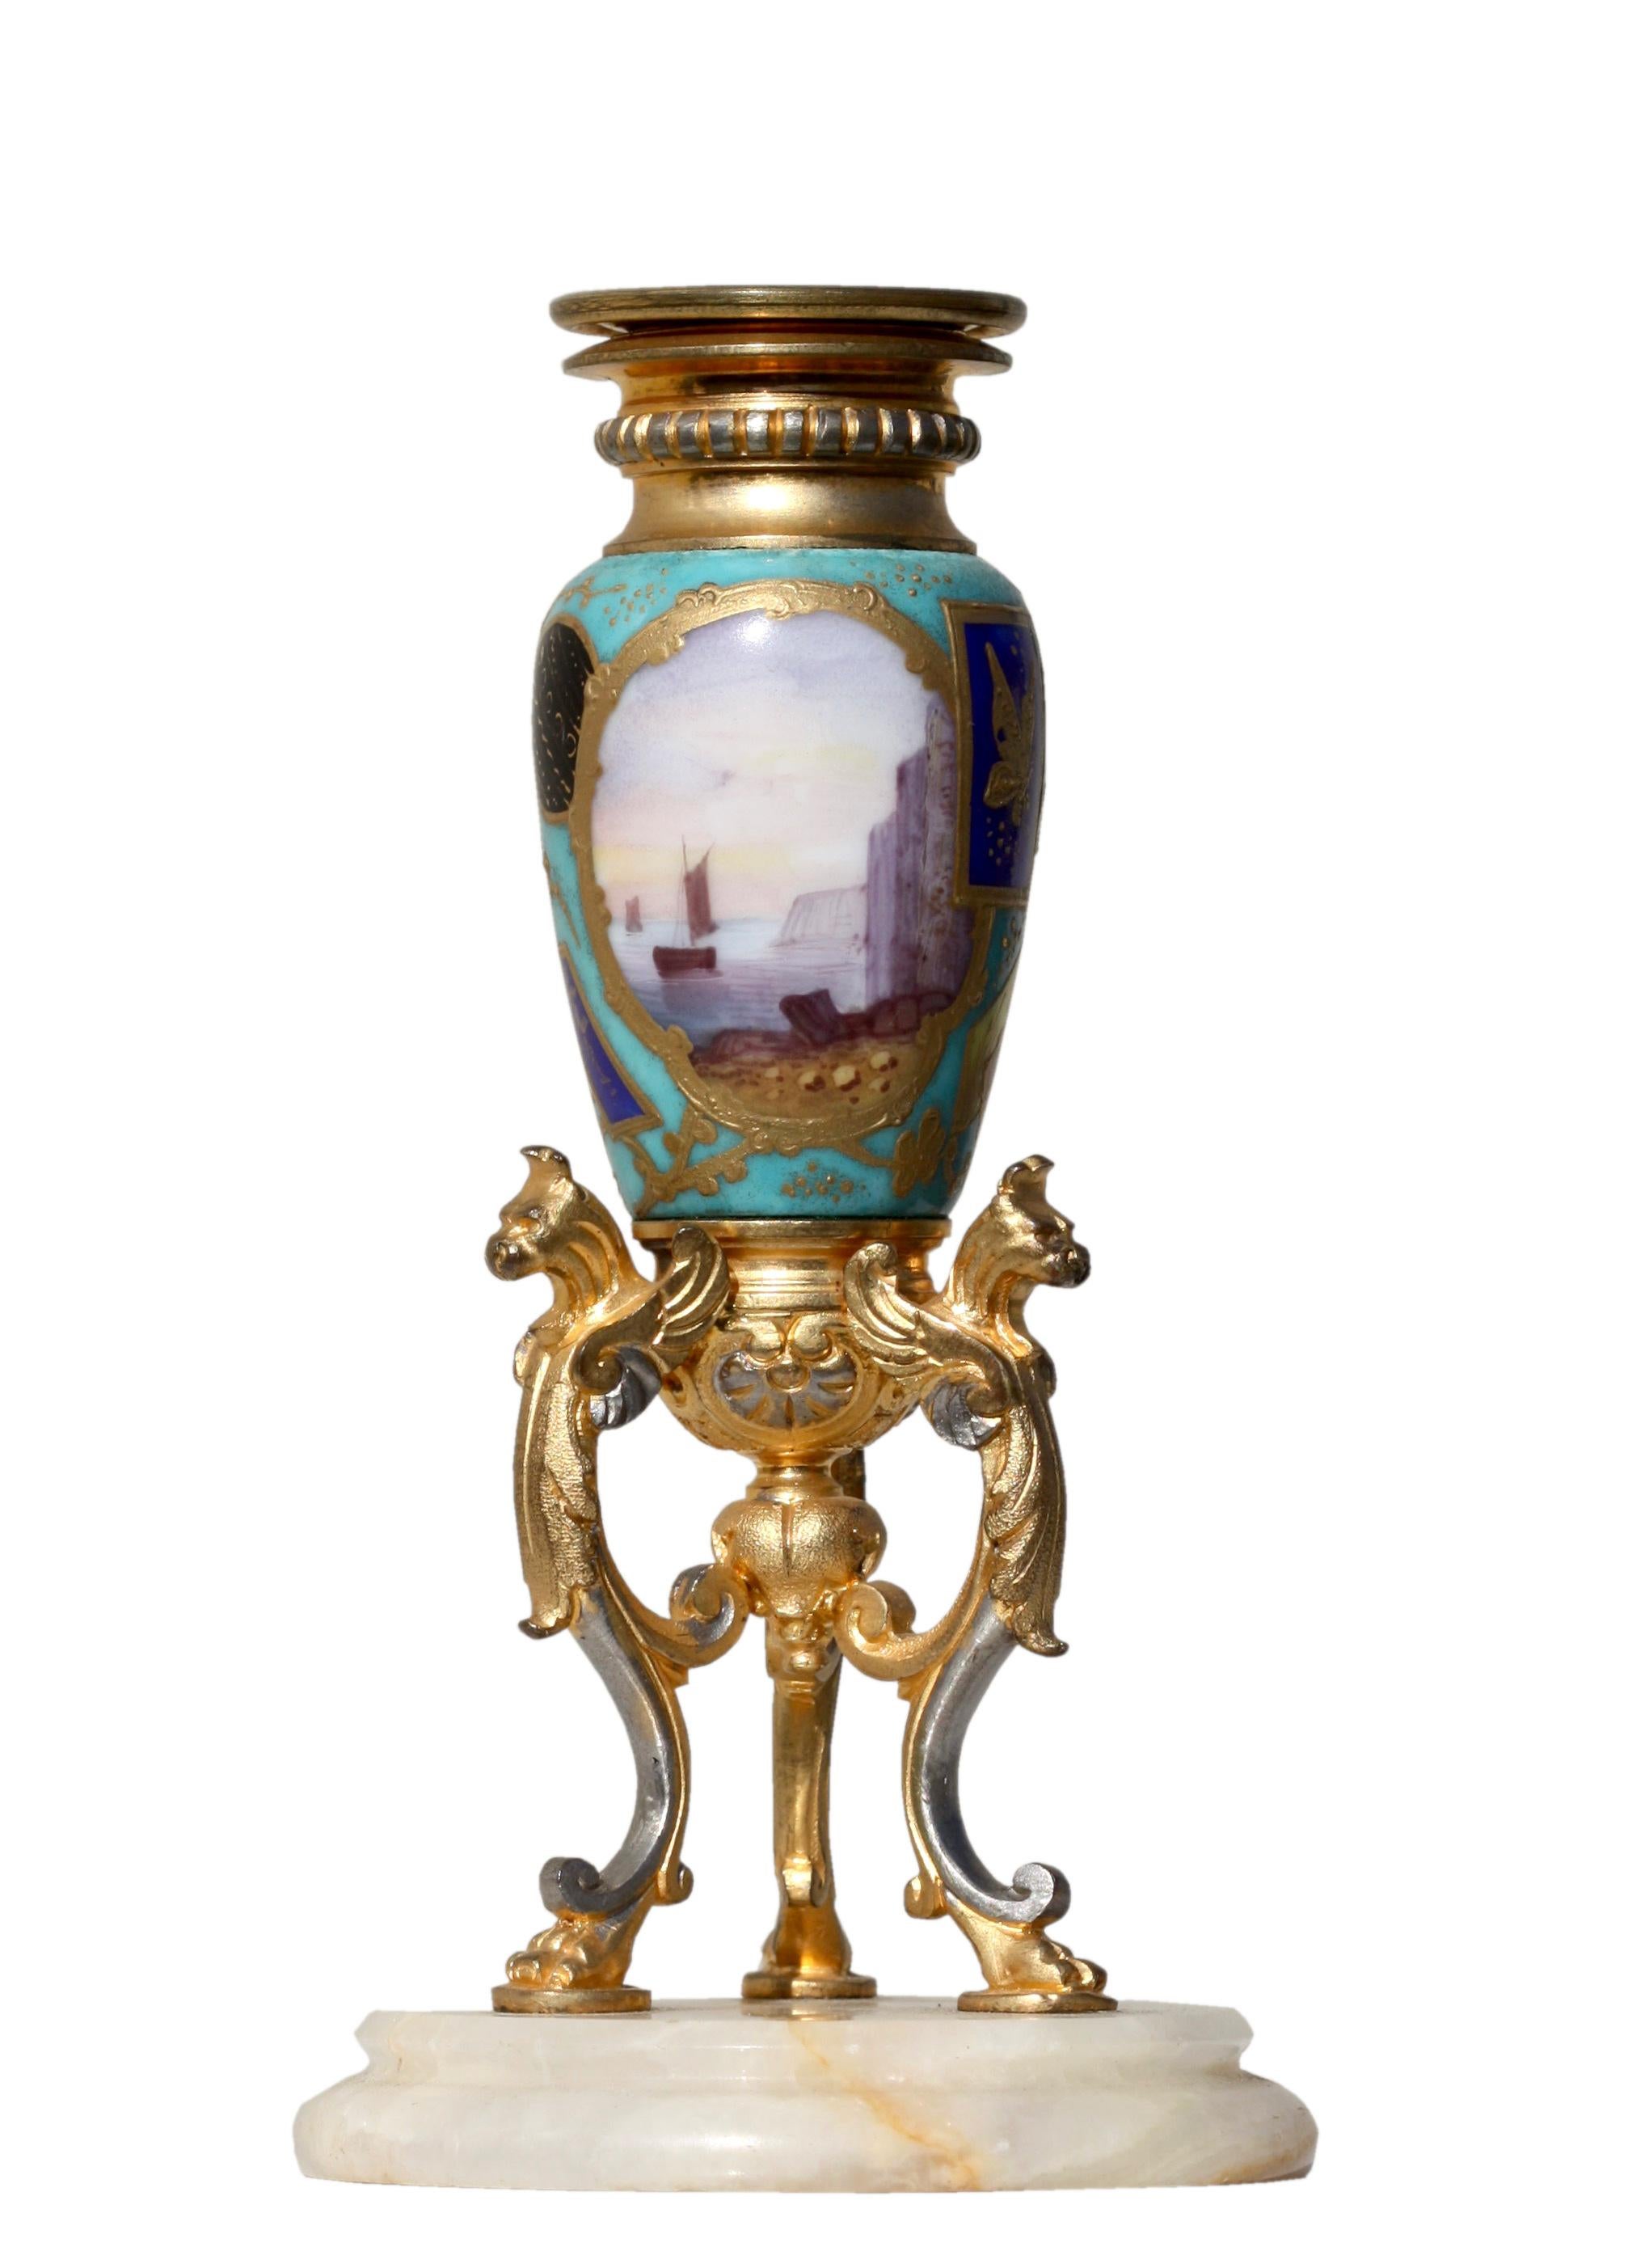 A French gilt bronze and Sevrès style porcelain-mounted candle stick 
19th century, the bronzes in Louis XV / XVI Transitional style, on a onyx stepped round base
Measures: Height 6 inches, width 3 1/8 inches.